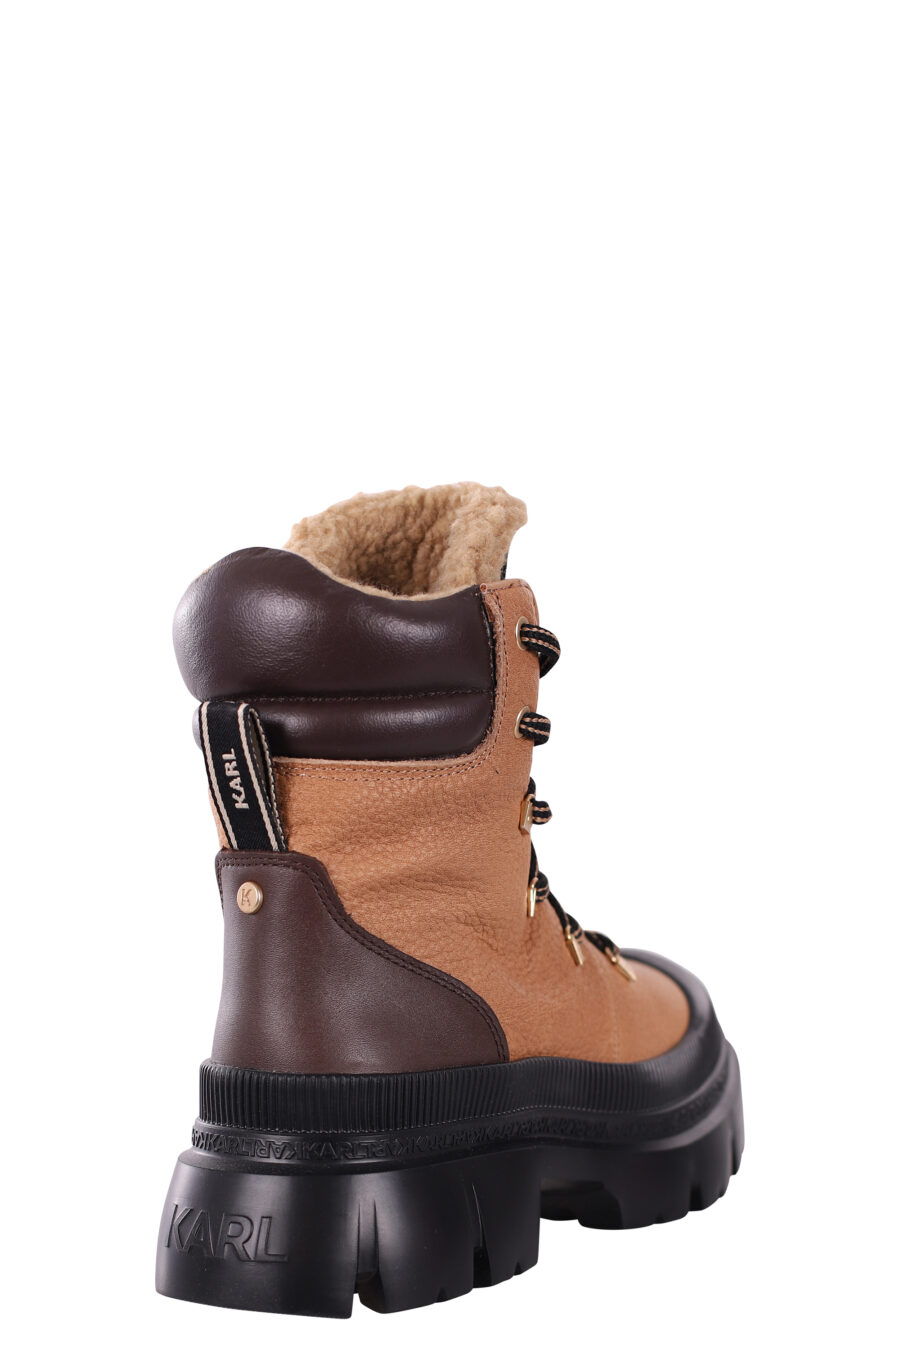 Brown ankle boots with black platform sole - IMG 5872